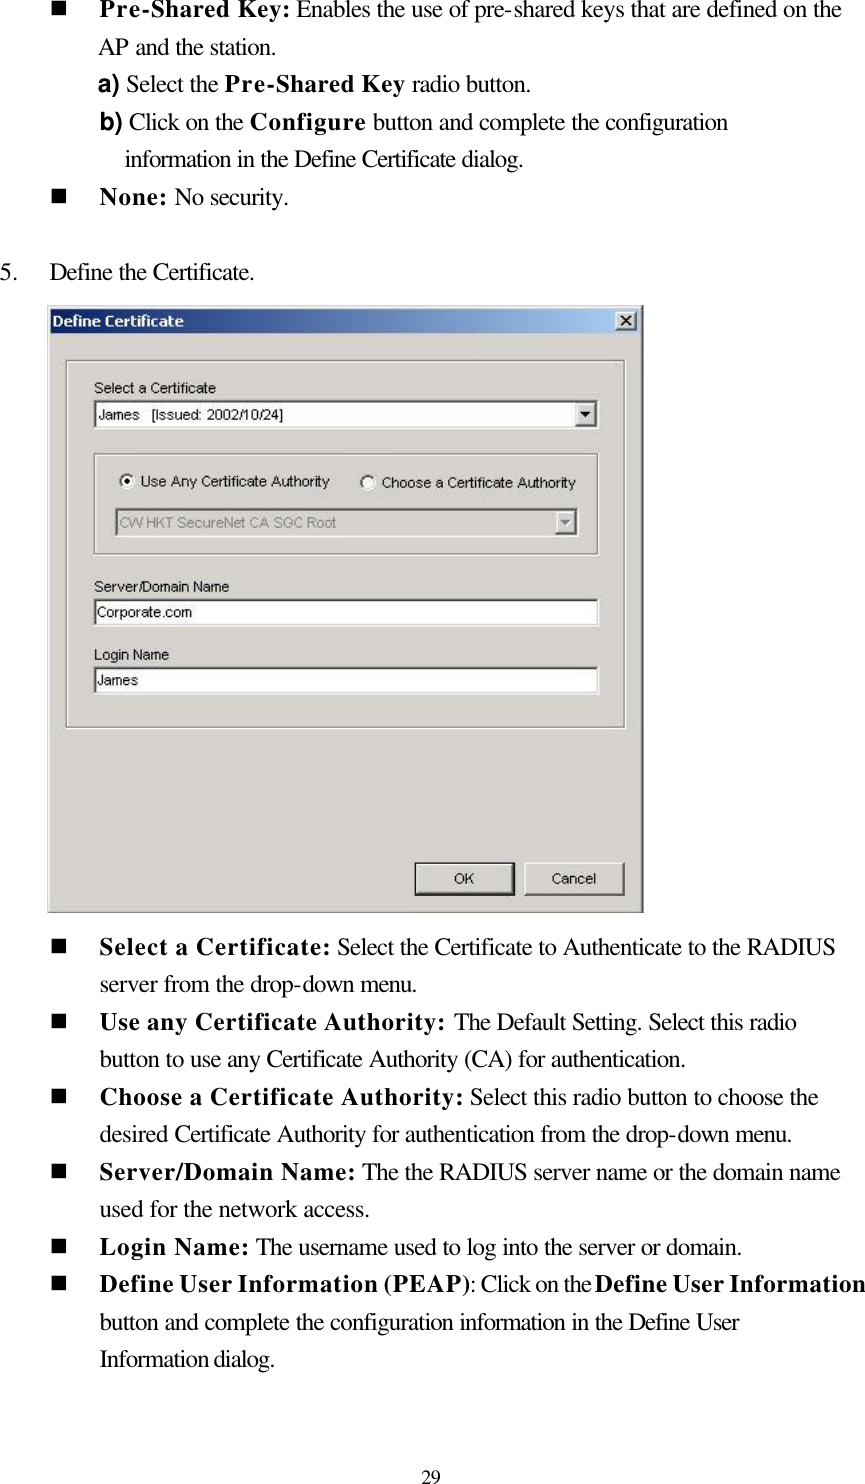  29 n Pre-Shared Key: Enables the use of pre-shared keys that are defined on the AP and the station. a) Select the Pre-Shared Key radio button. b) Click on the Configure button and complete the configuration information in the Define Certificate dialog. n None: No security.  5.    Define the Certificate.       n Select a Certificate: Select the Certificate to Authenticate to the RADIUS server from the drop-down menu. n Use any Certificate Authority: The Default Setting. Select this radio button to use any Certificate Authority (CA) for authentication. n Choose a Certificate Authority: Select this radio button to choose the desired Certificate Authority for authentication from the drop-down menu. n Server/Domain Name: The the RADIUS server name or the domain name used for the network access. n Login Name: The username used to log into the server or domain. n Define User Information (PEAP): Click on the Define User Information button and complete the configuration information in the Define User Information dialog.  